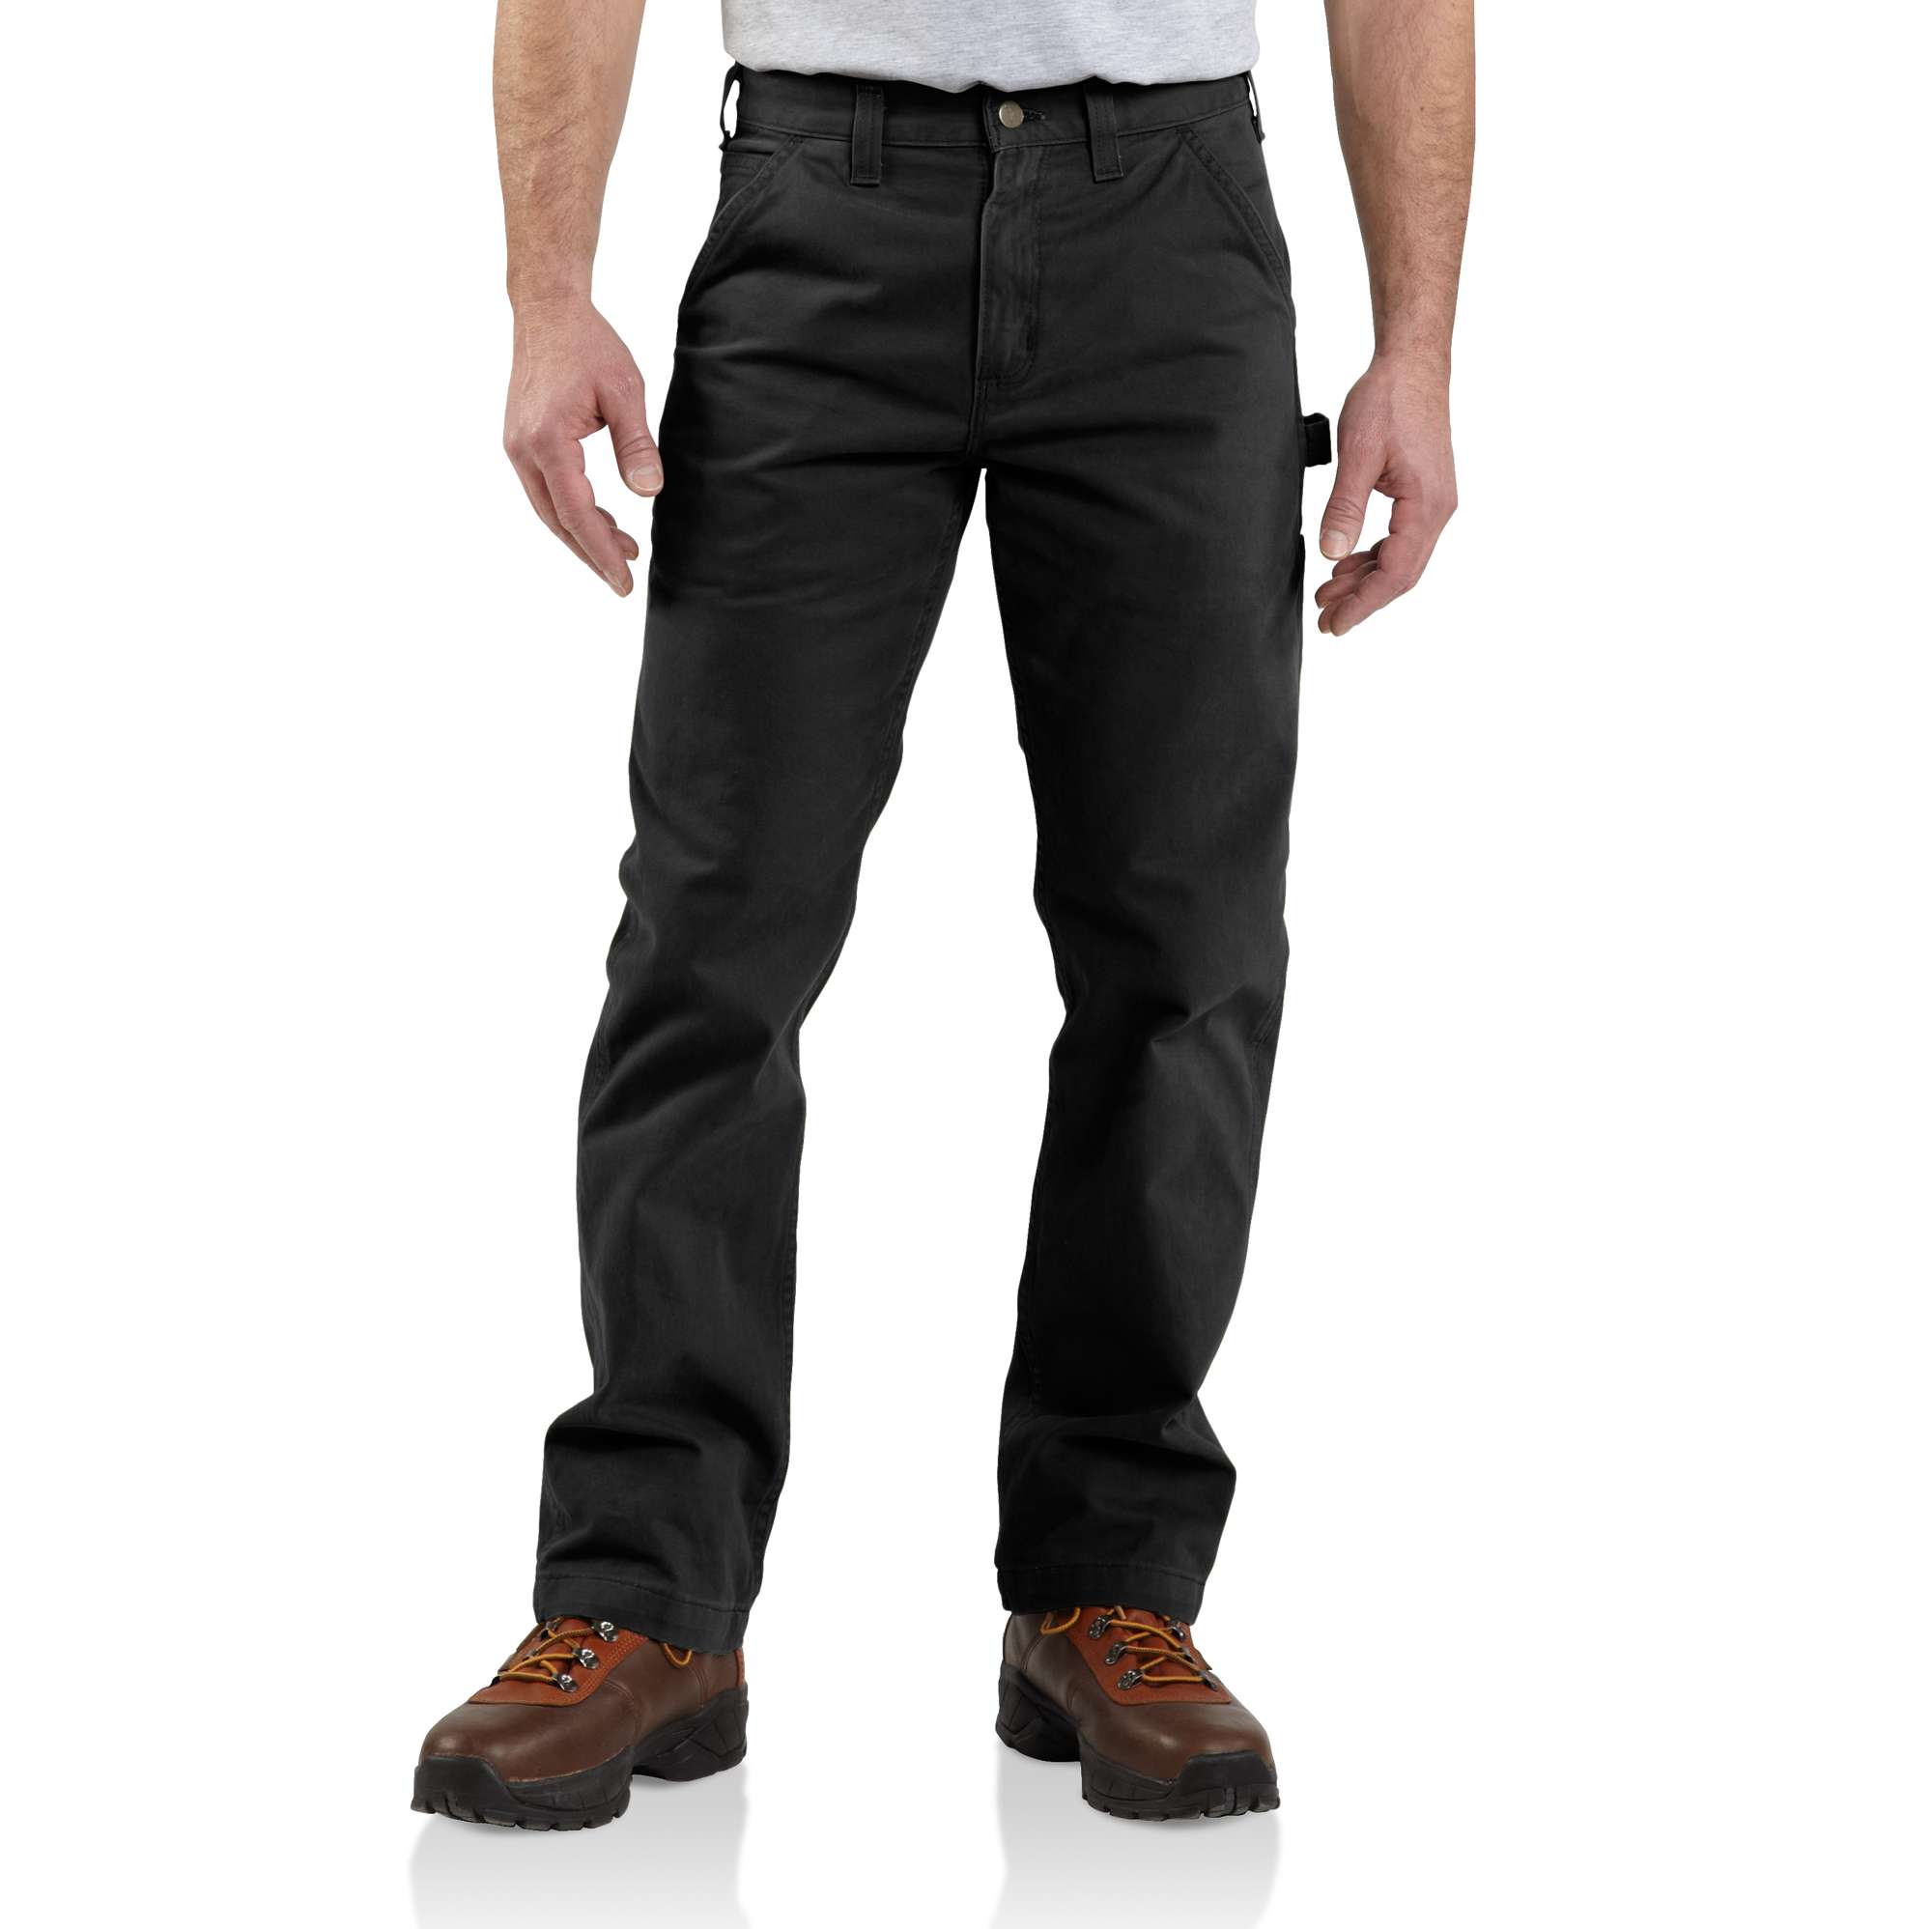 Why Wear Specialty Work Pants Instead of Jeans? | Work Authority